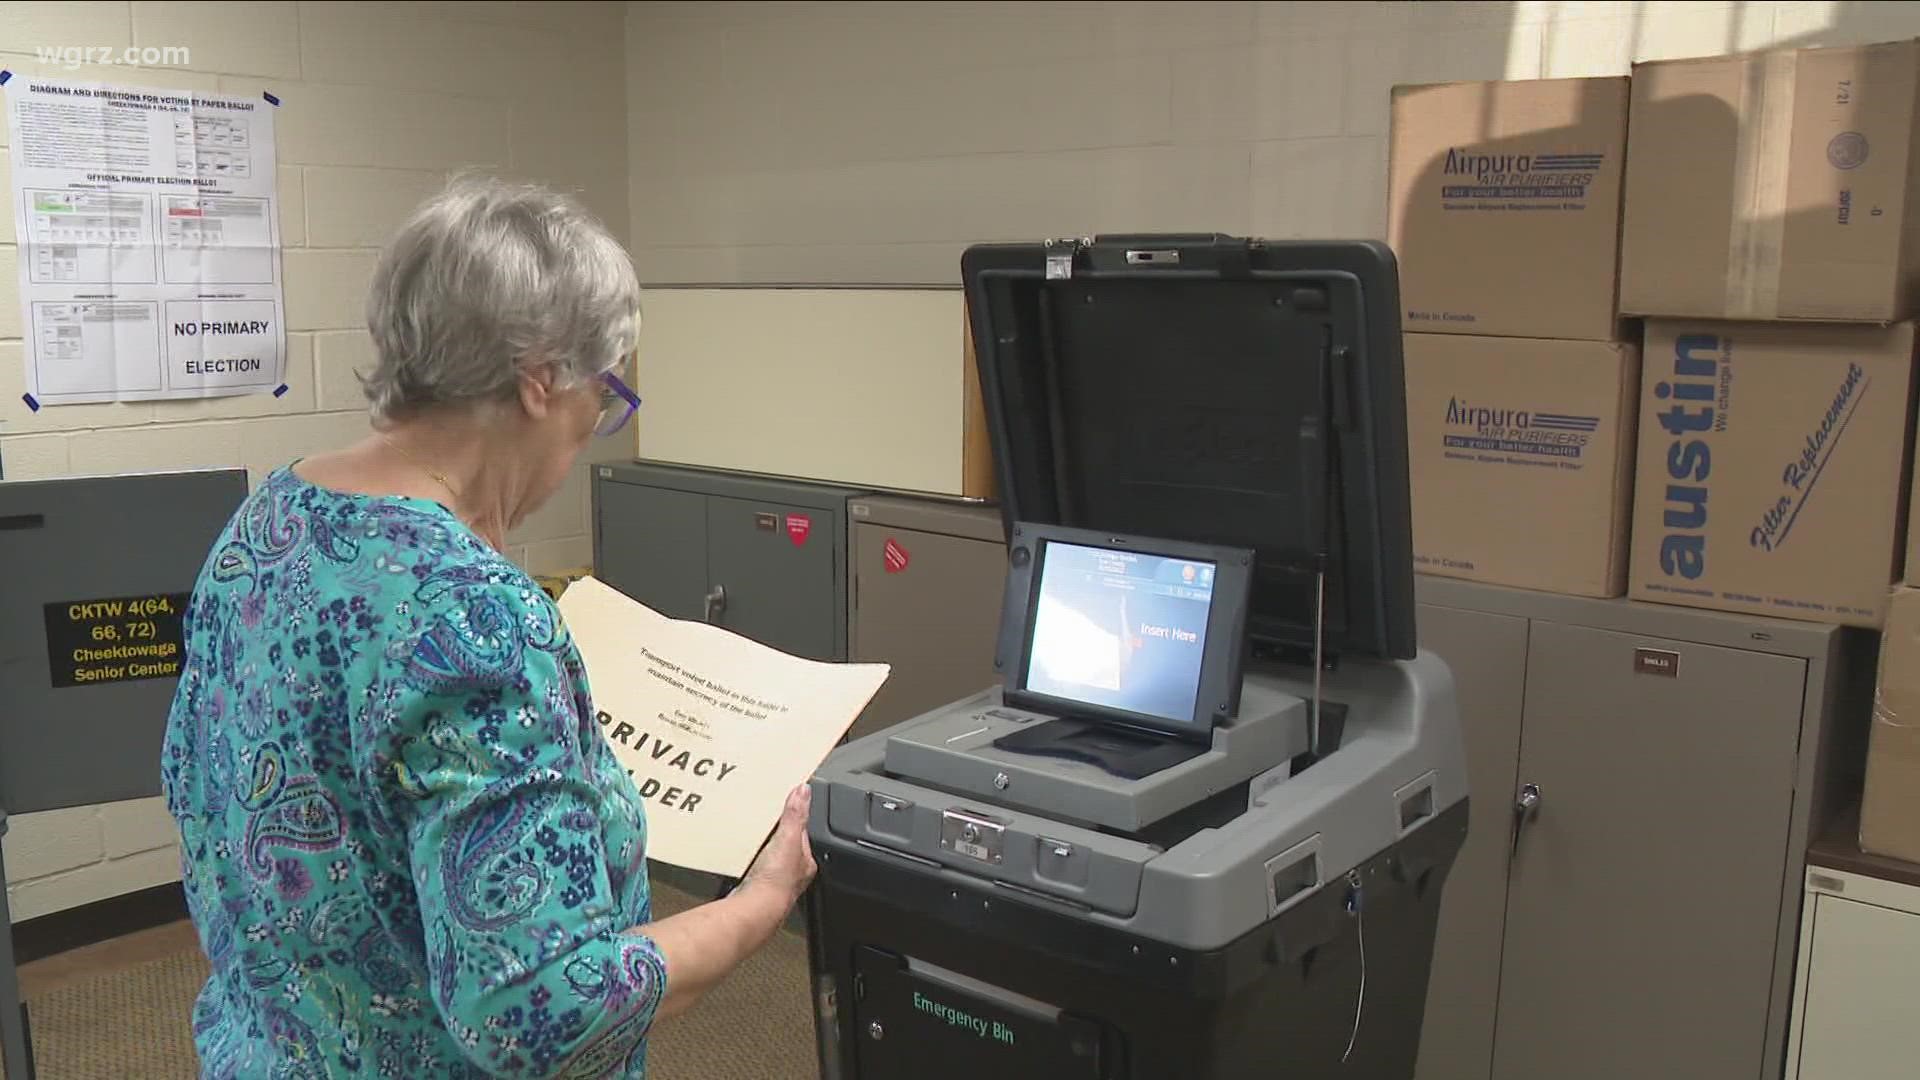 Chautauqua and Niagara County Boards said they've seen a low turnout only around 9% of eligible voters as of 4 p.m.